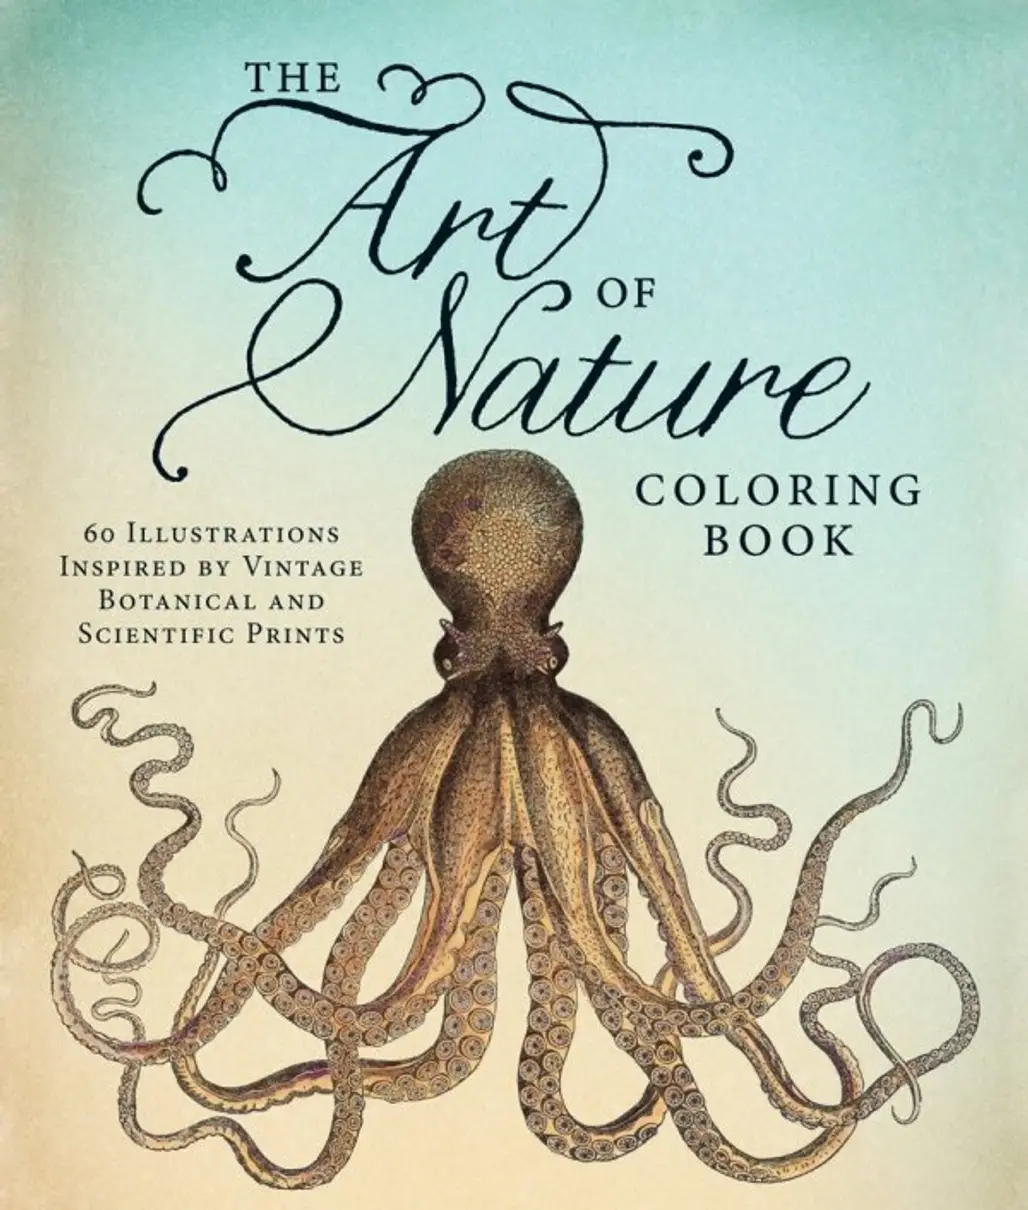 The Art of Nature, Coloring Book